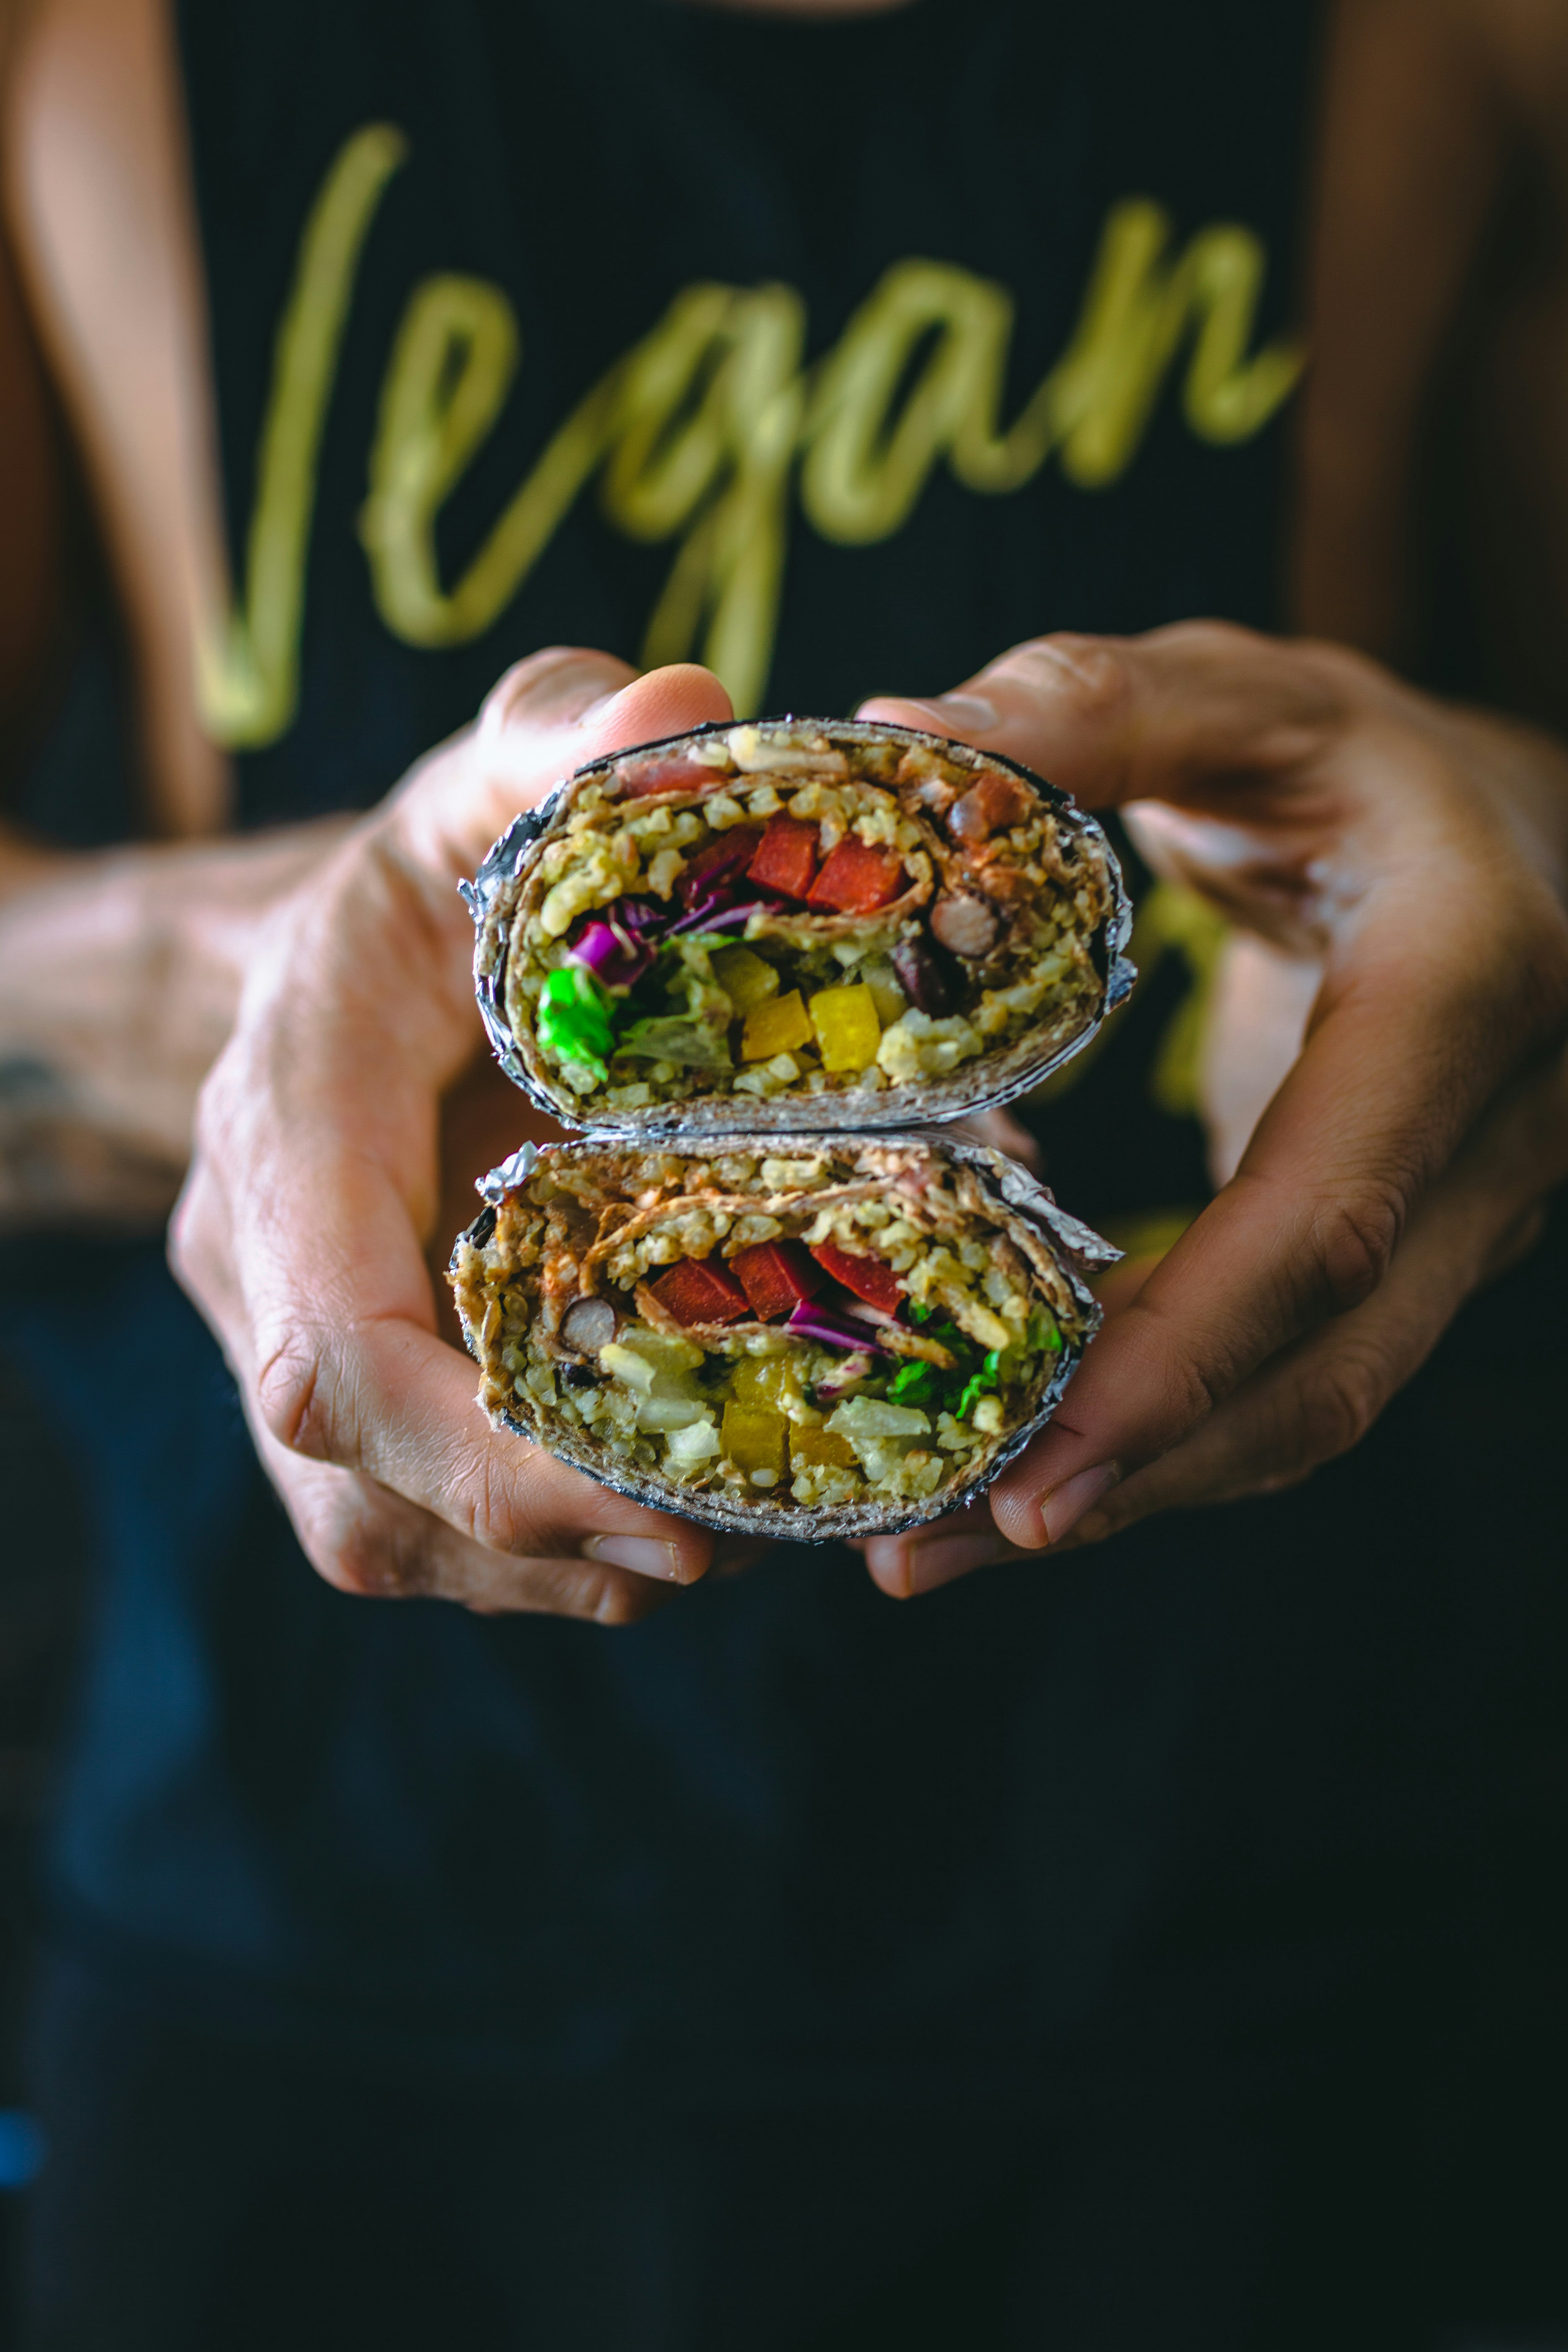 A man wearing a t-shirt that says 'vegan' holds a burrito filled with vegetables towards the camera 